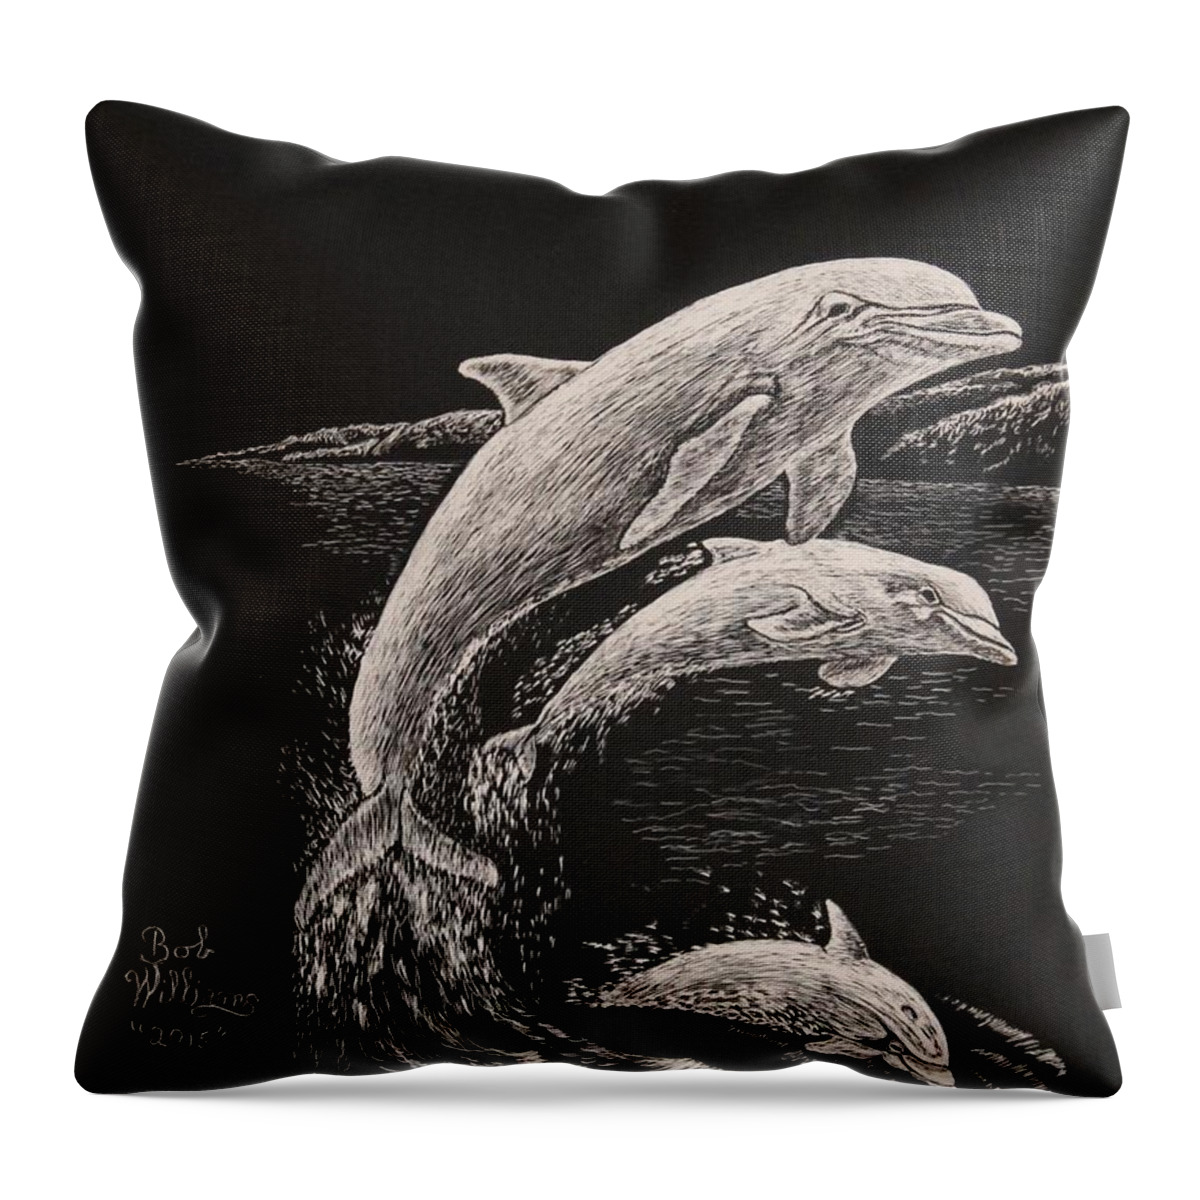 Clayboard Throw Pillow featuring the painting Pacific Ocean Acrobats by Bob Williams